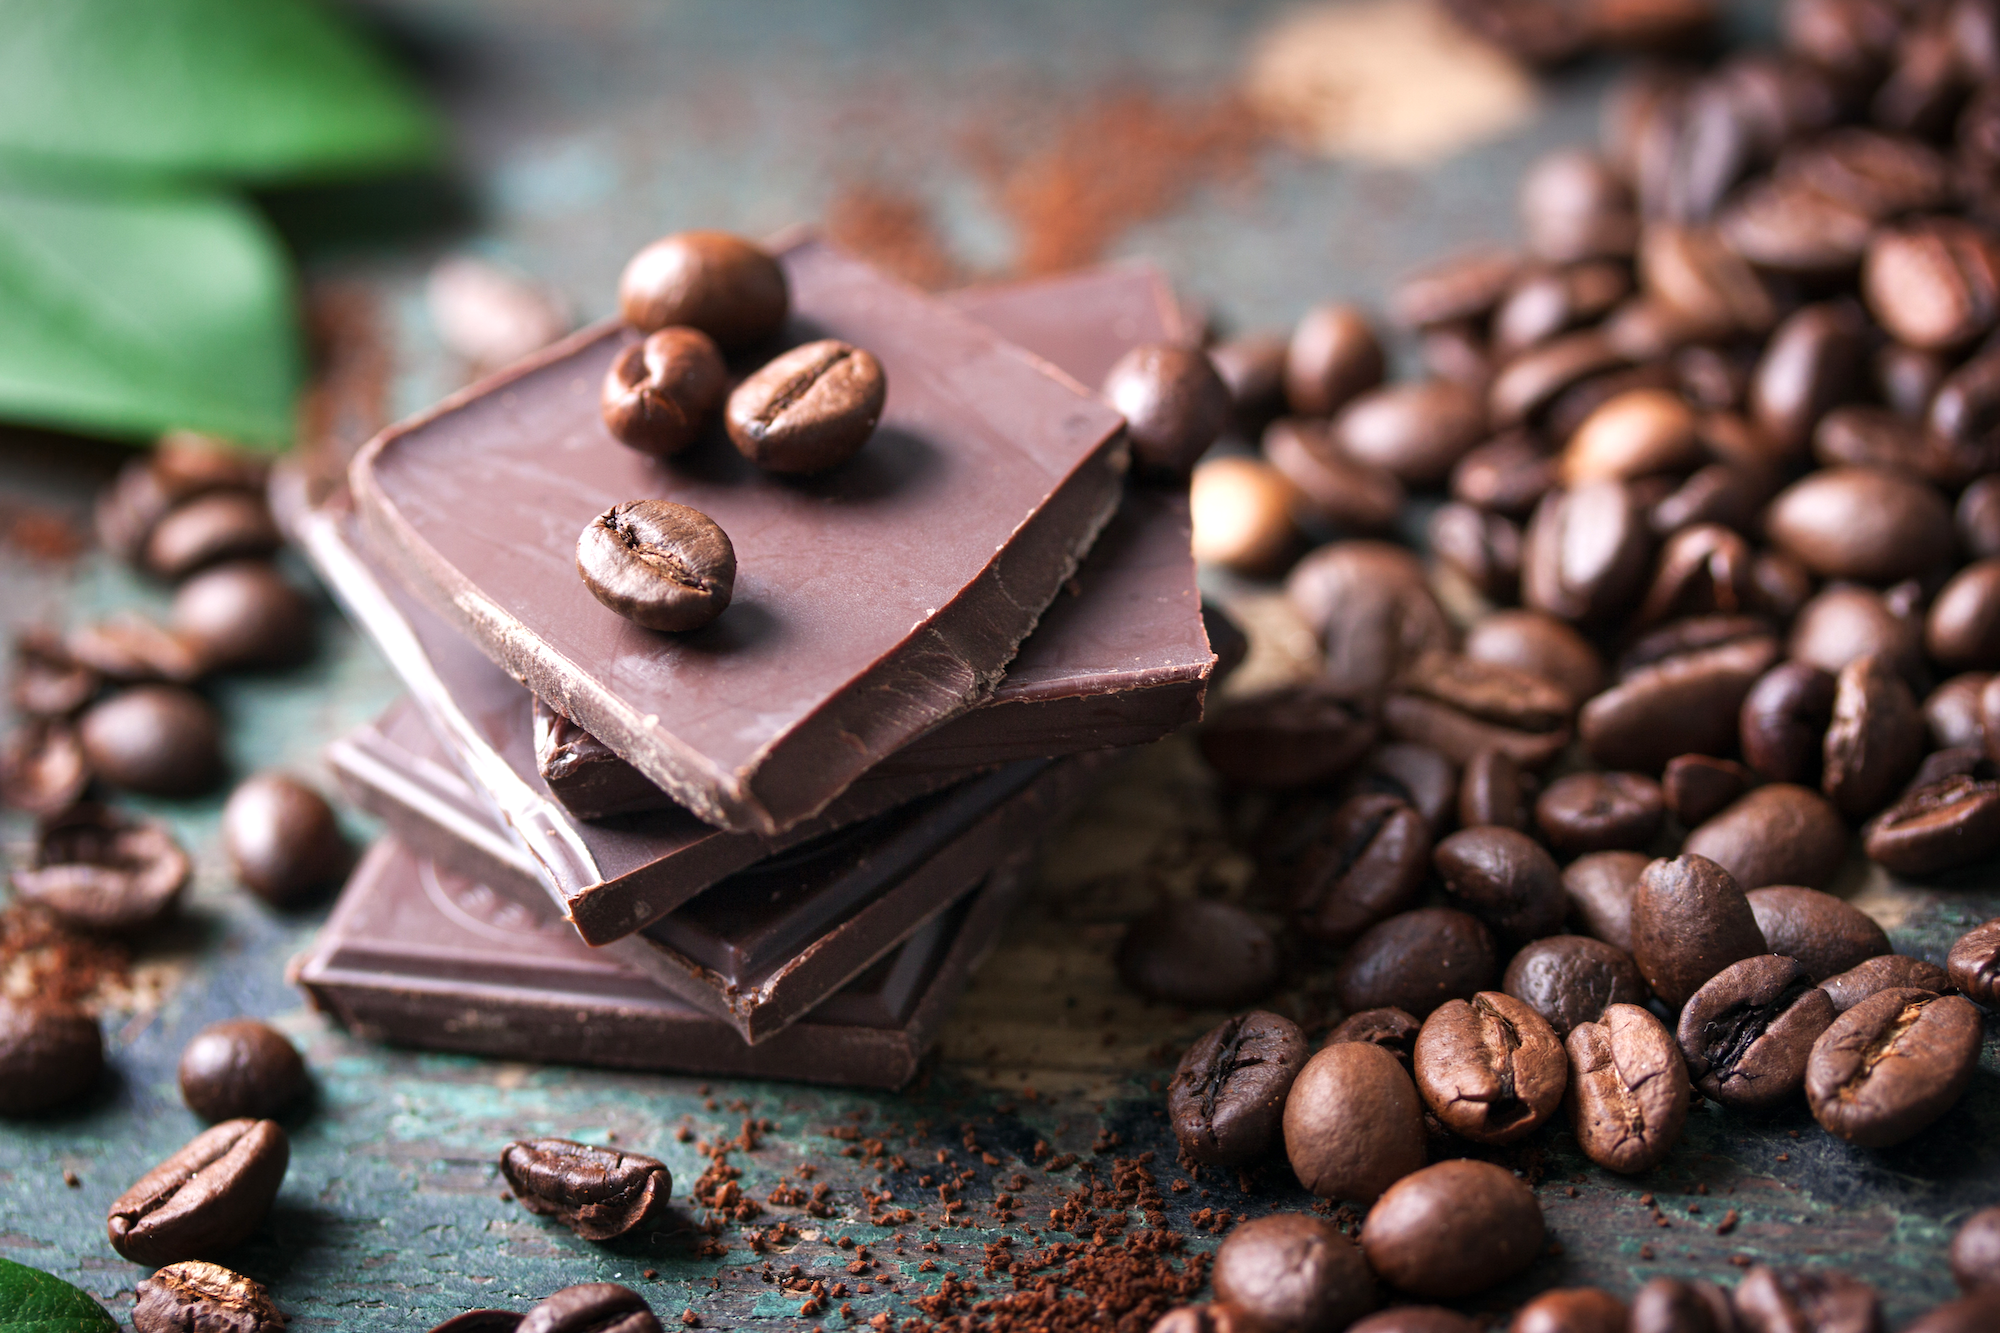 When it comes to food pairings, chocolate and coffee seem like an obvious choice given that humans have cultivated cacao and coffee plants for centuries